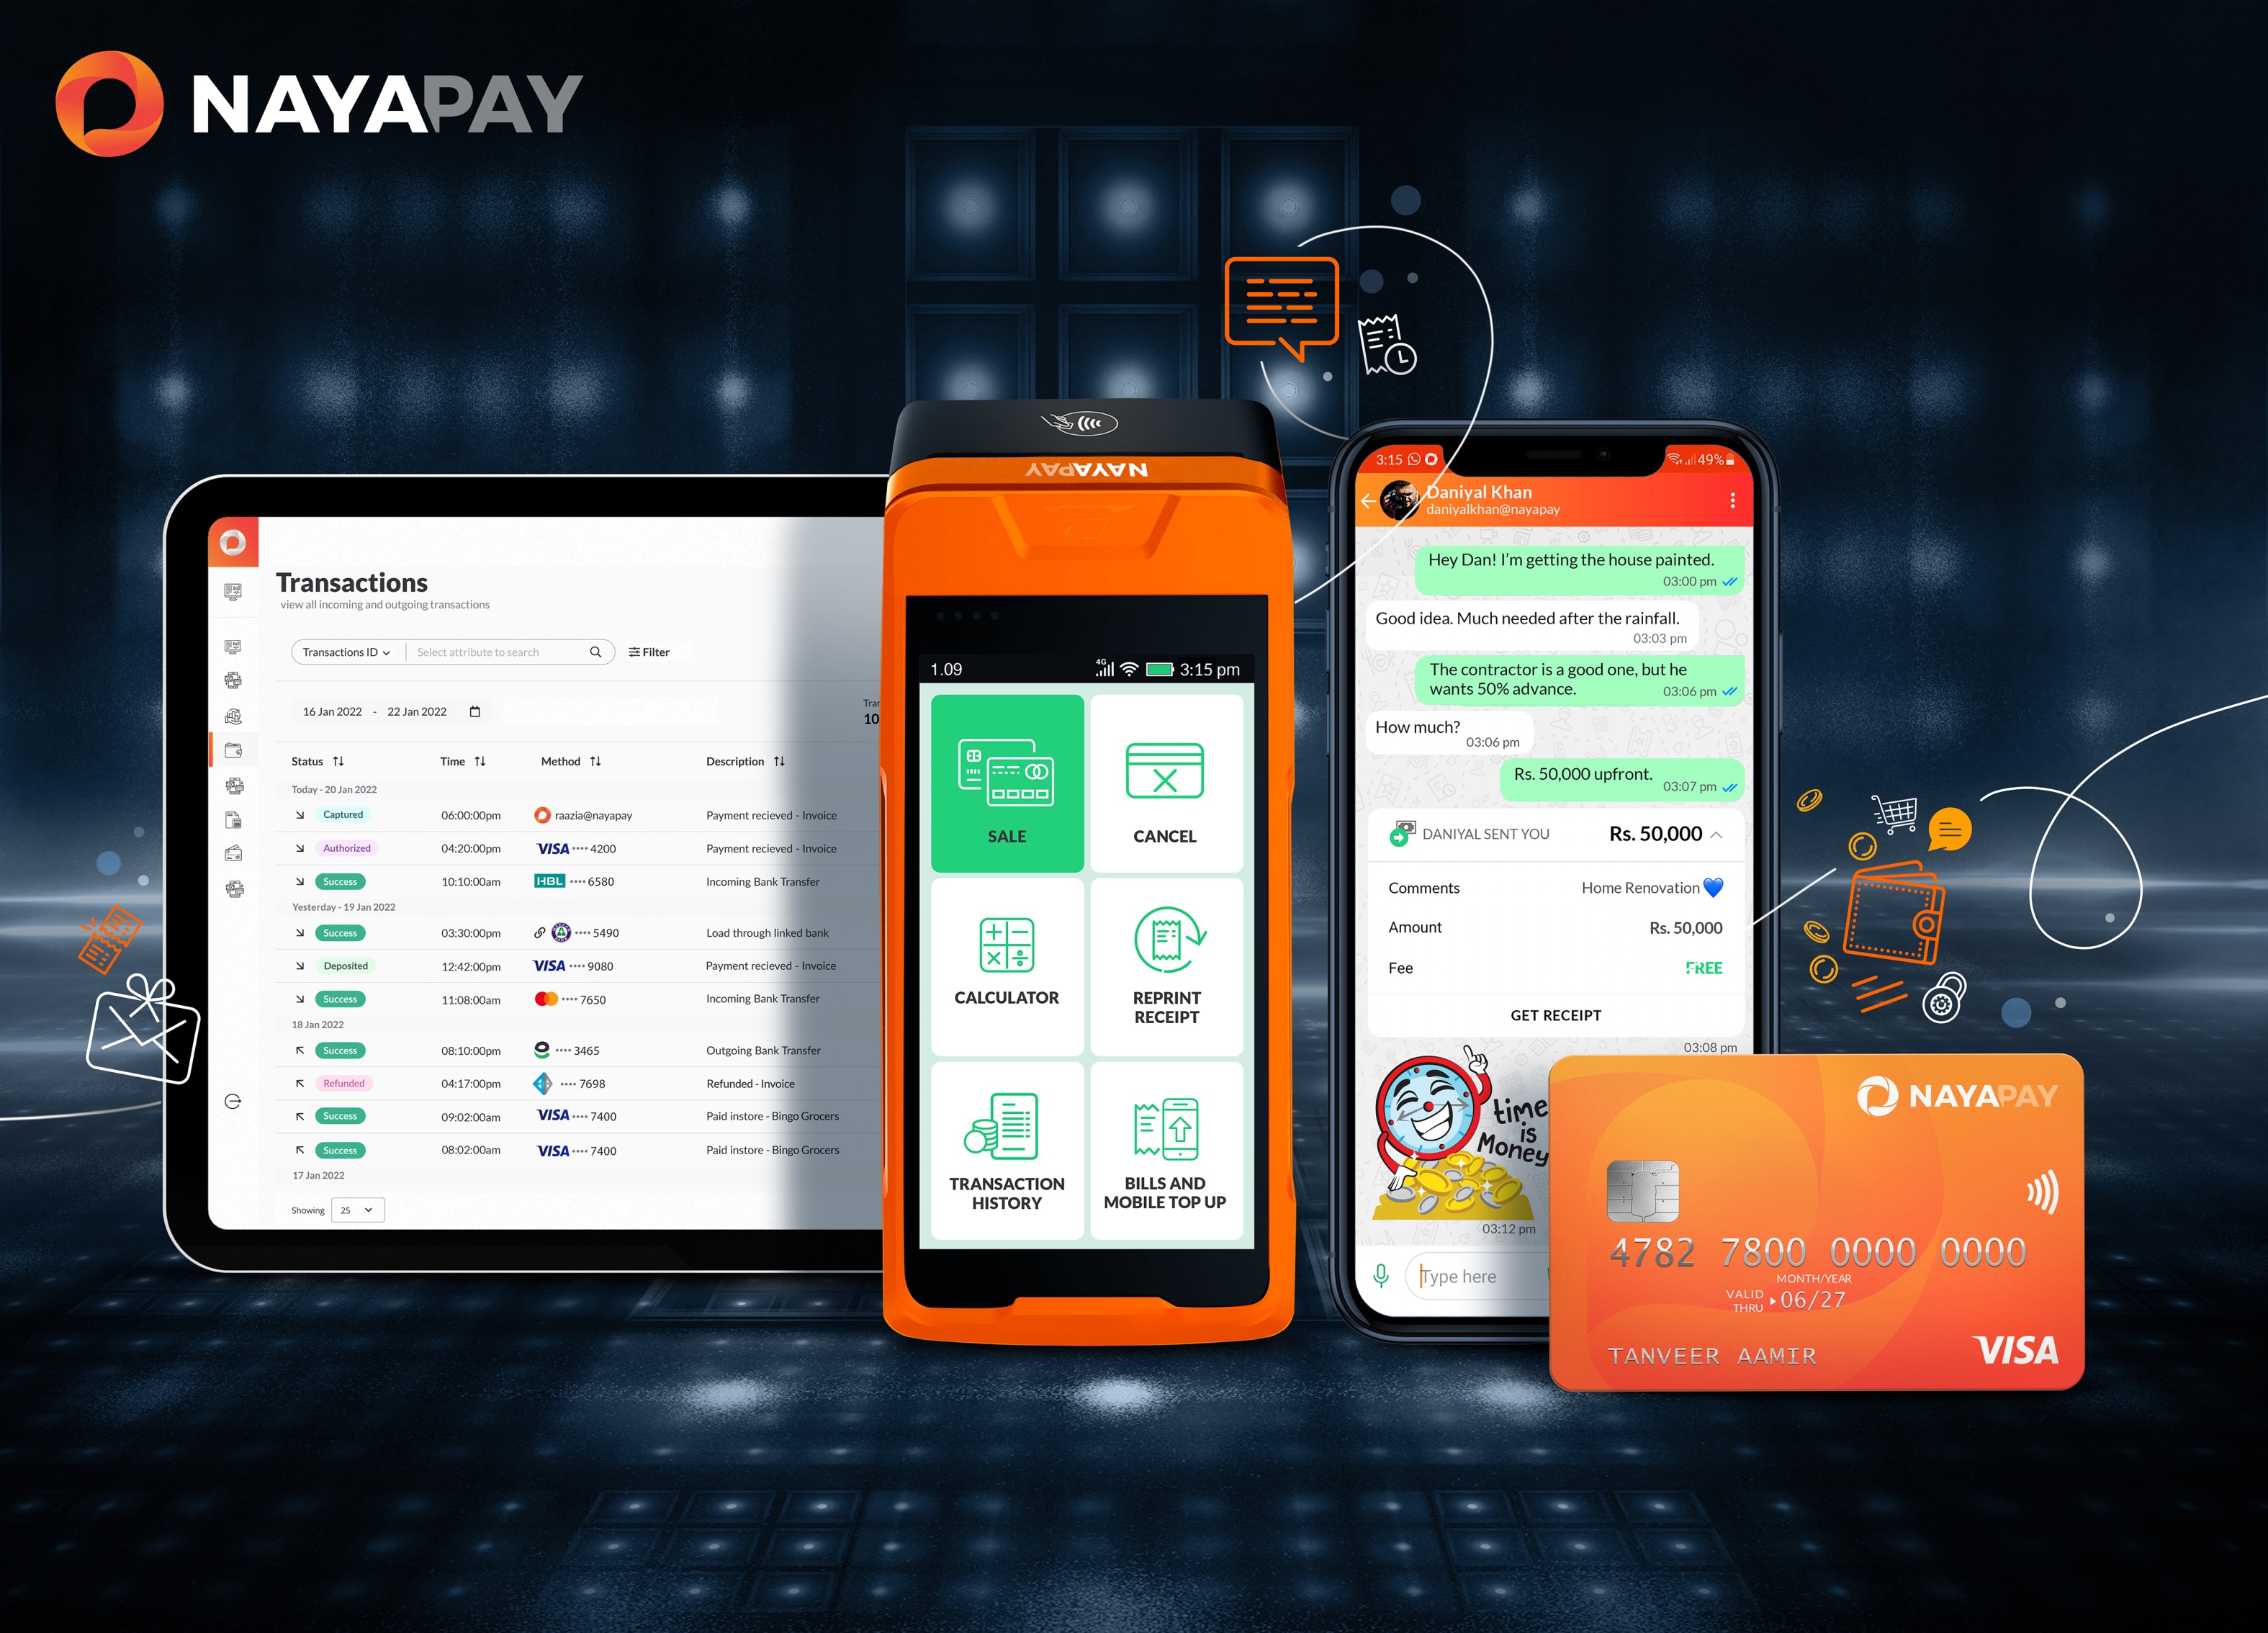 NayaPay secures $13 million, largest seed funding in South Asia for its messaging and payment app